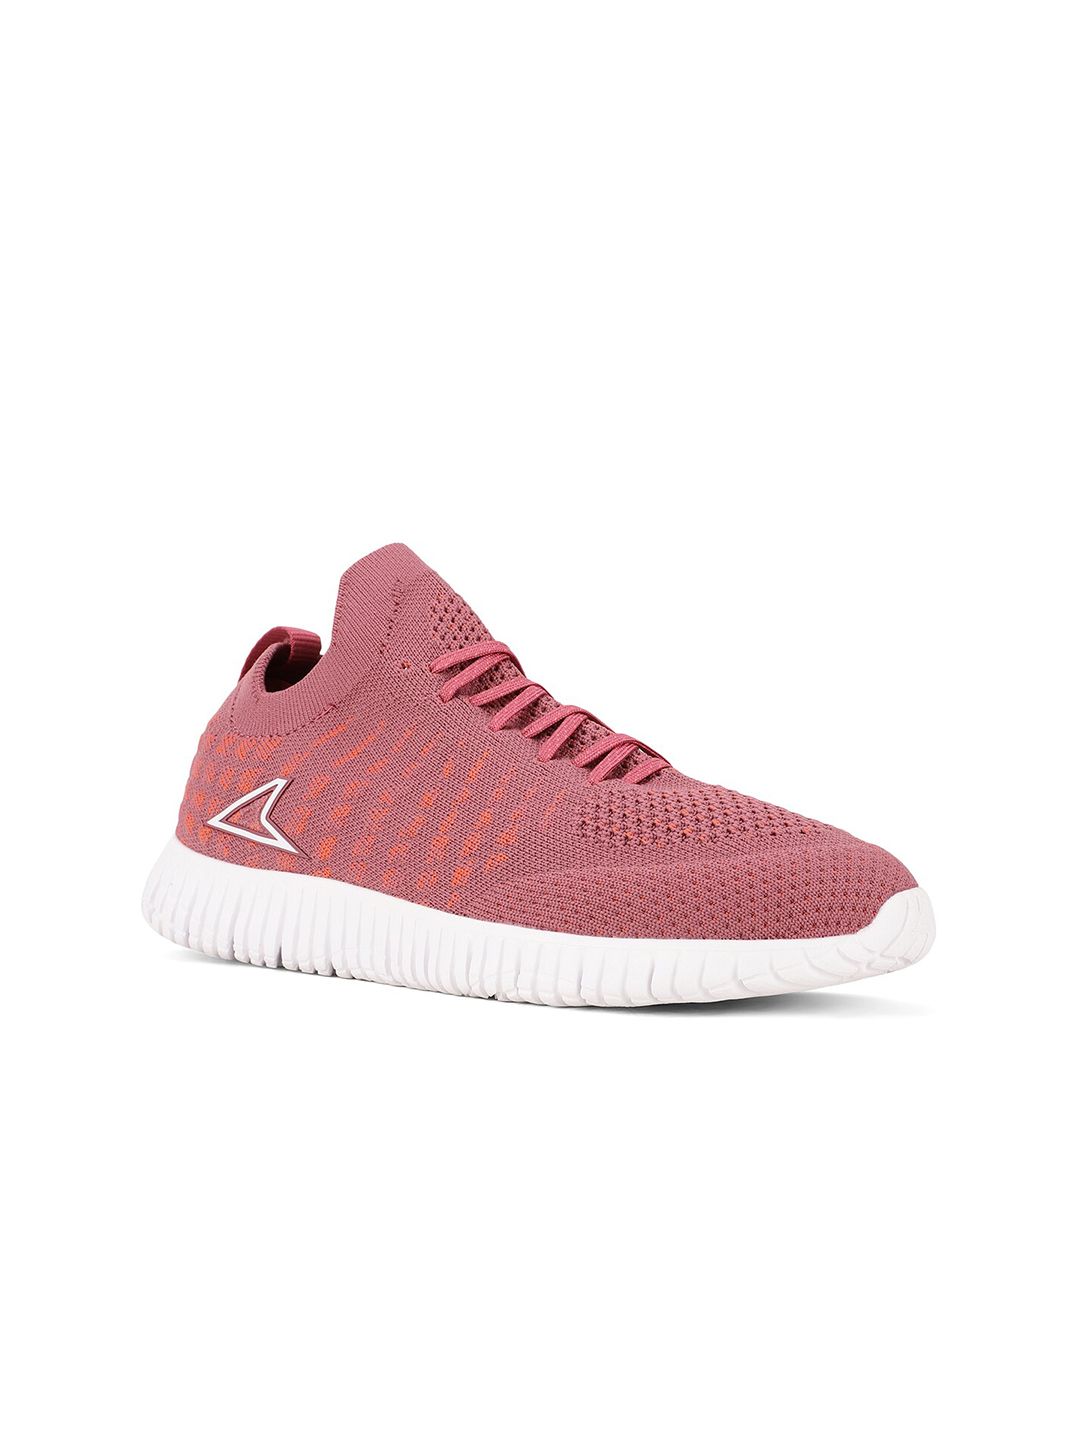 Power Women Pink Textile Running Non-Marking Shoes Price in India